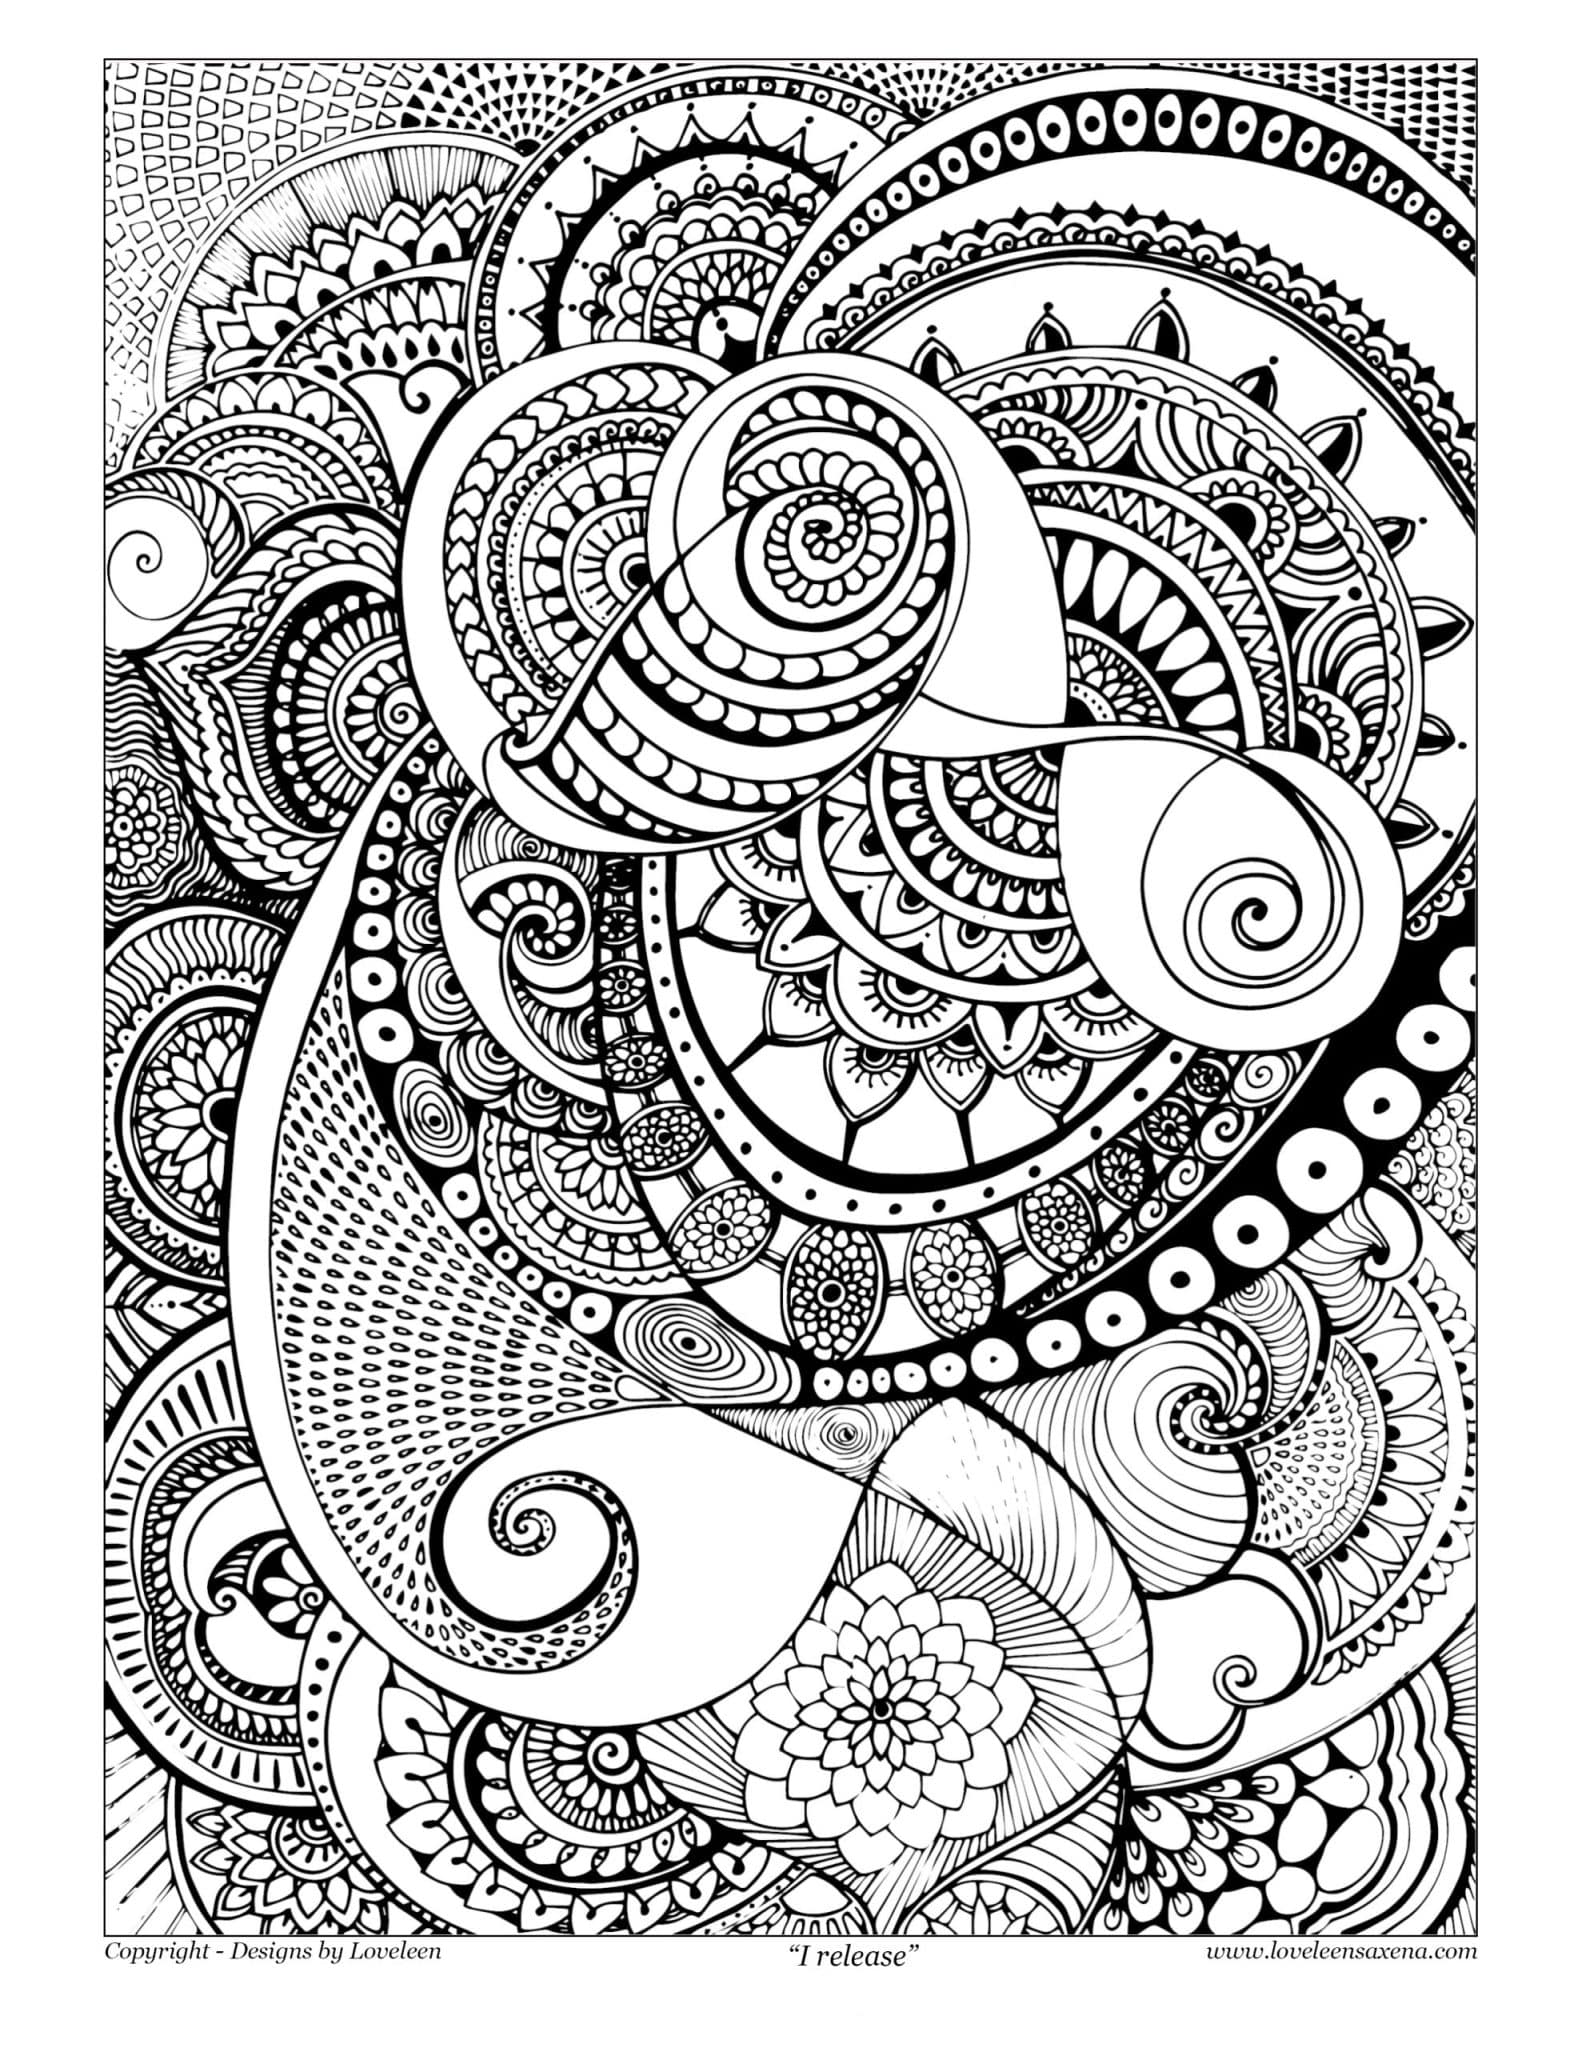 I Release Coloring Page